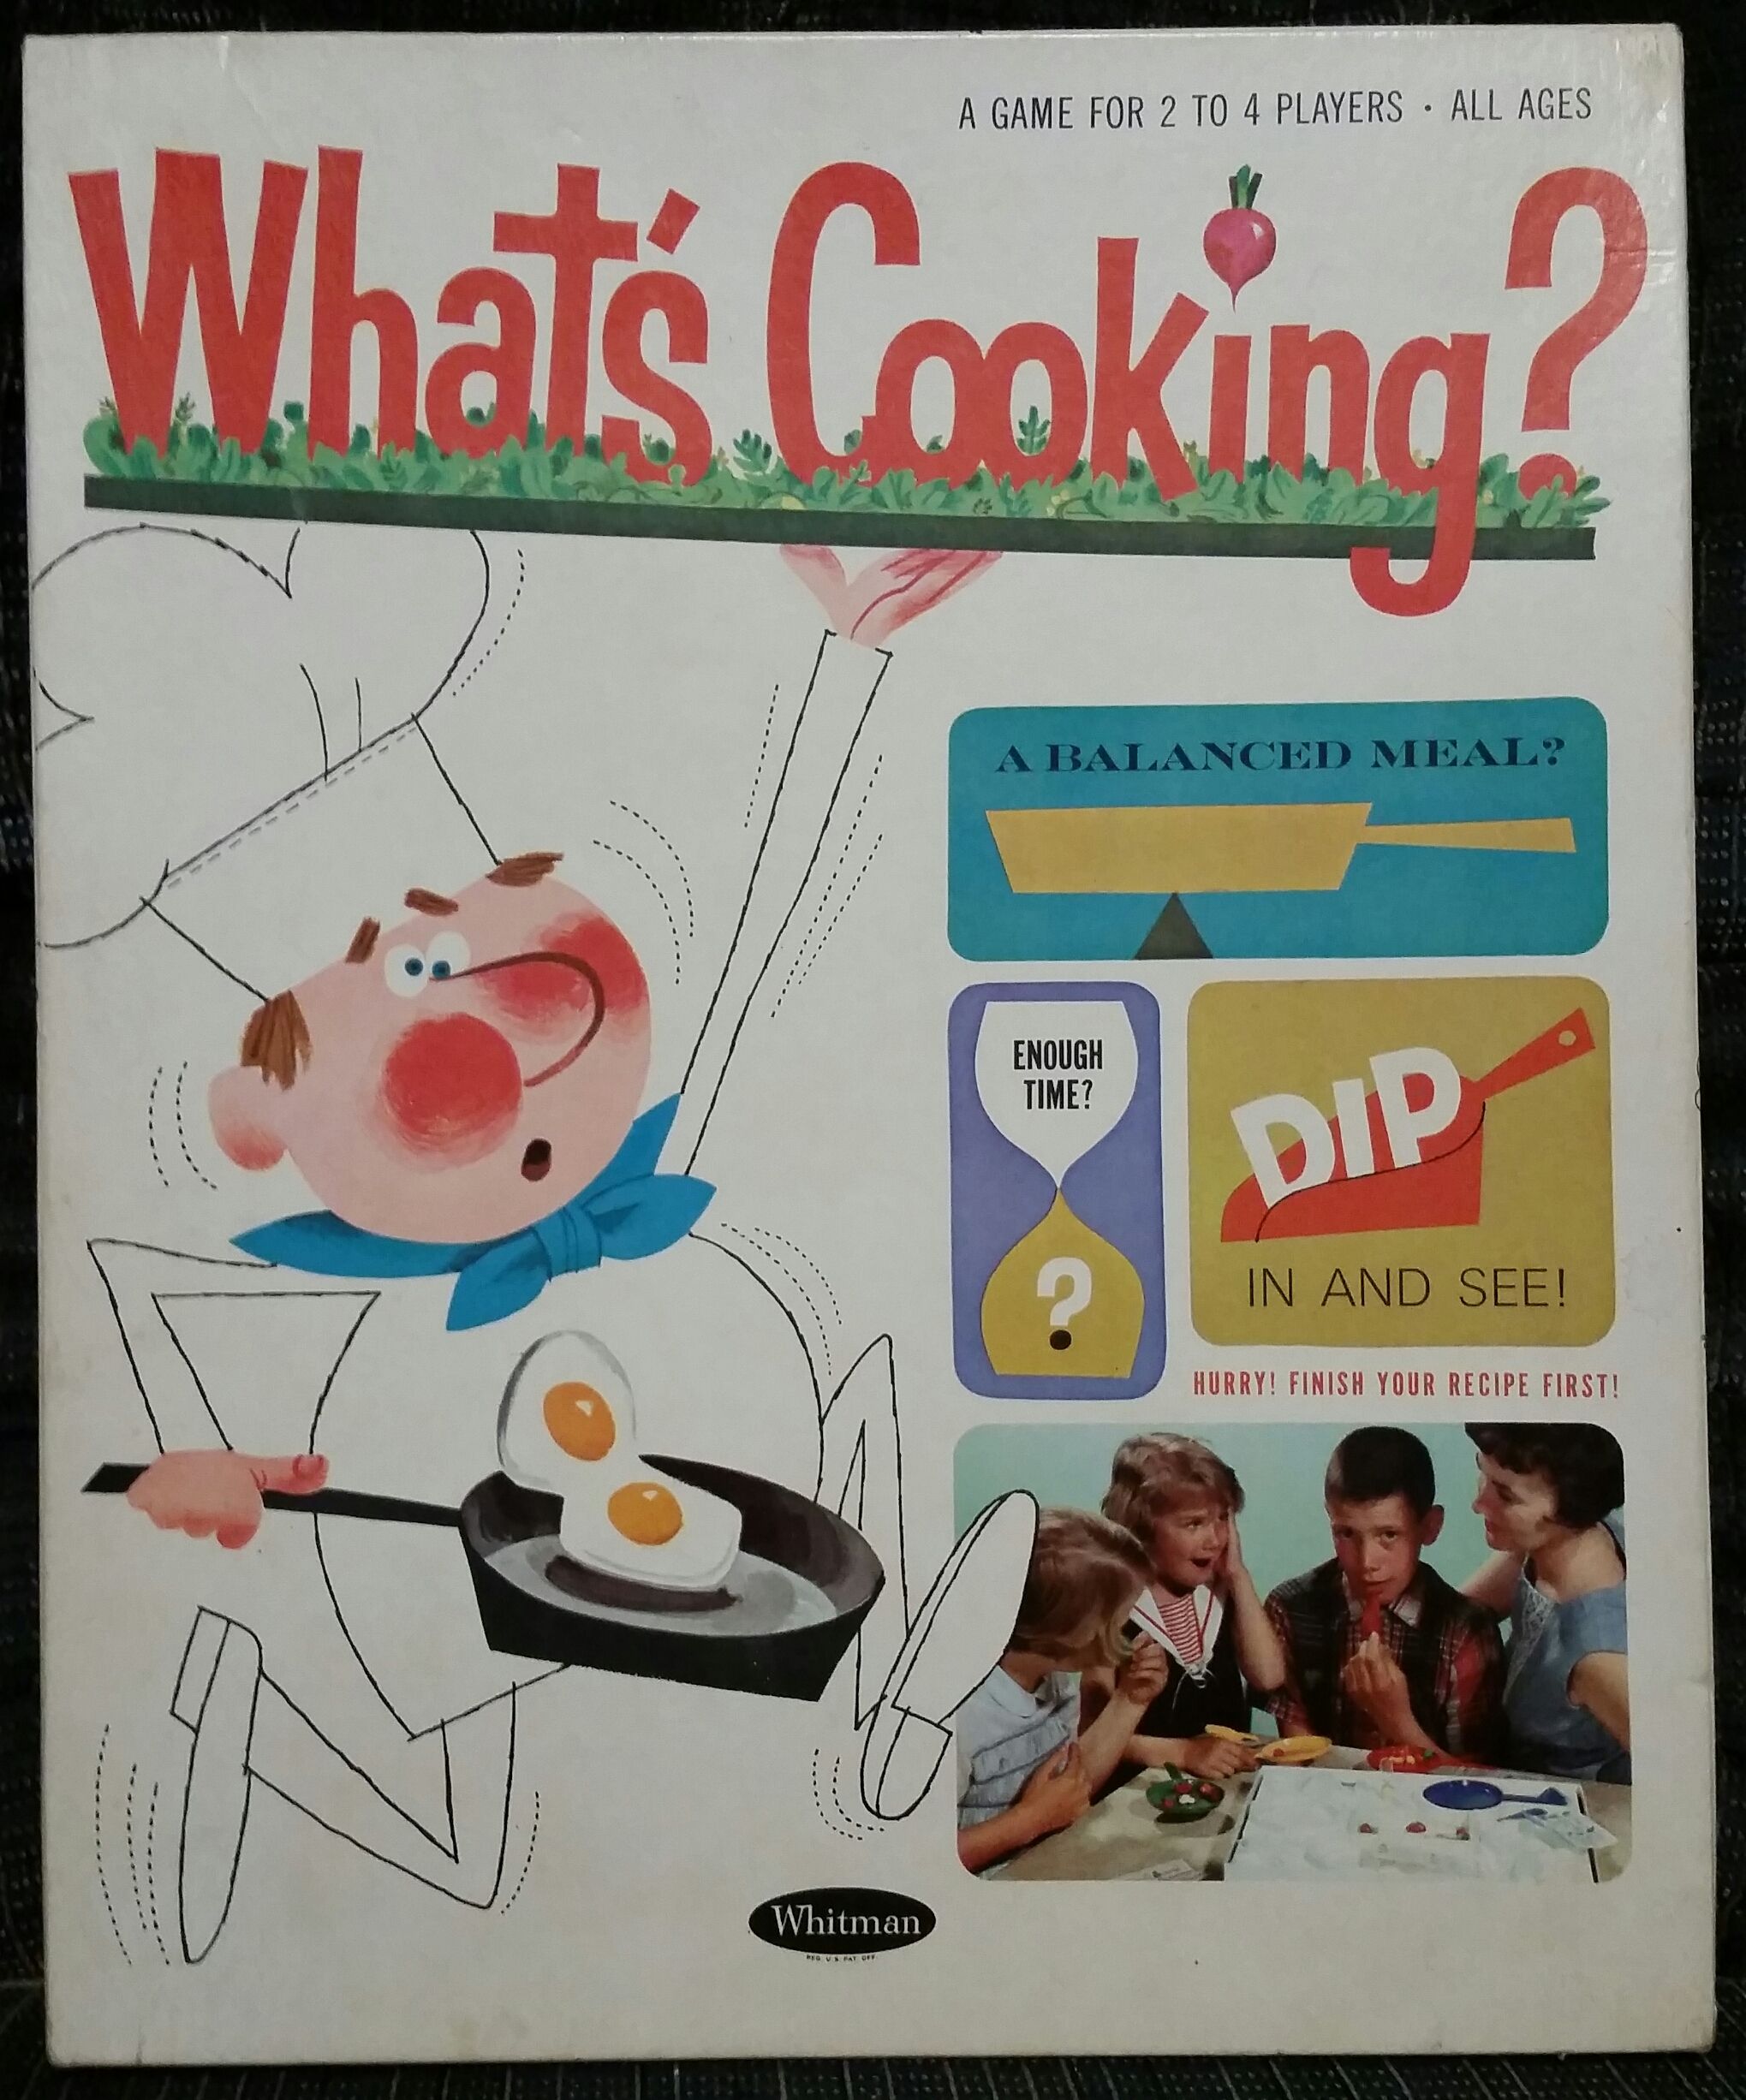 What's Cooking?